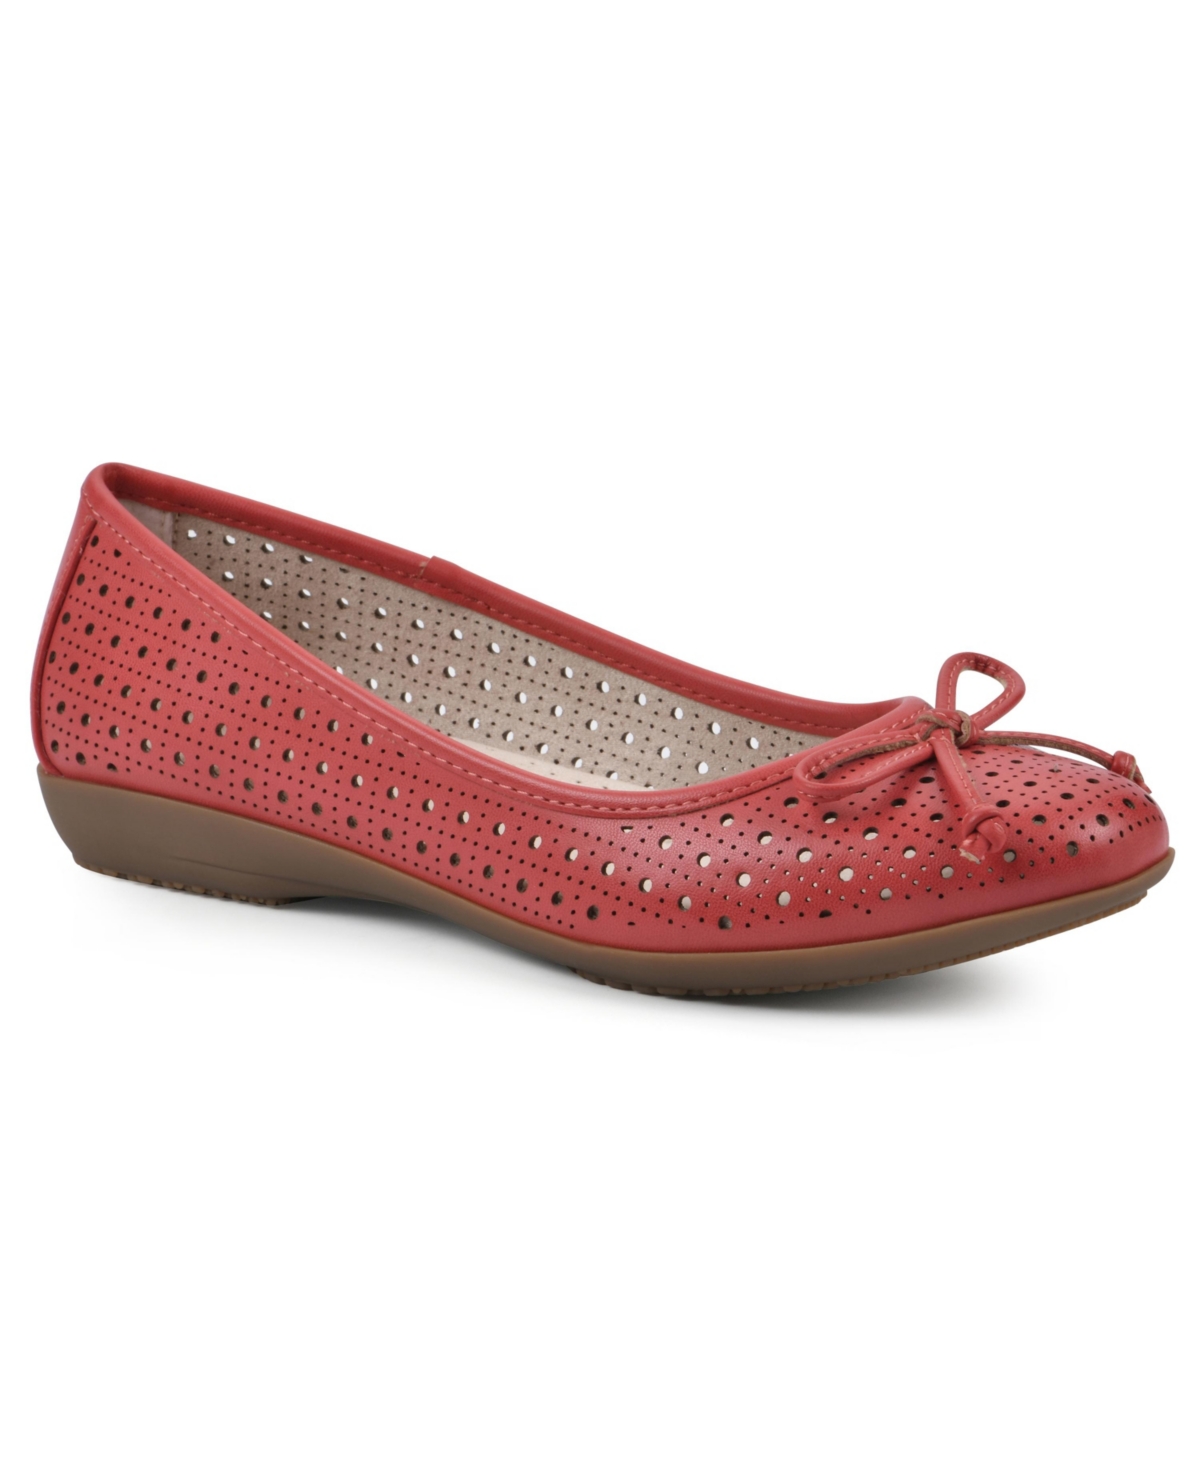 Women's Cheryl Ballet Flats - Red Burnished Smooth